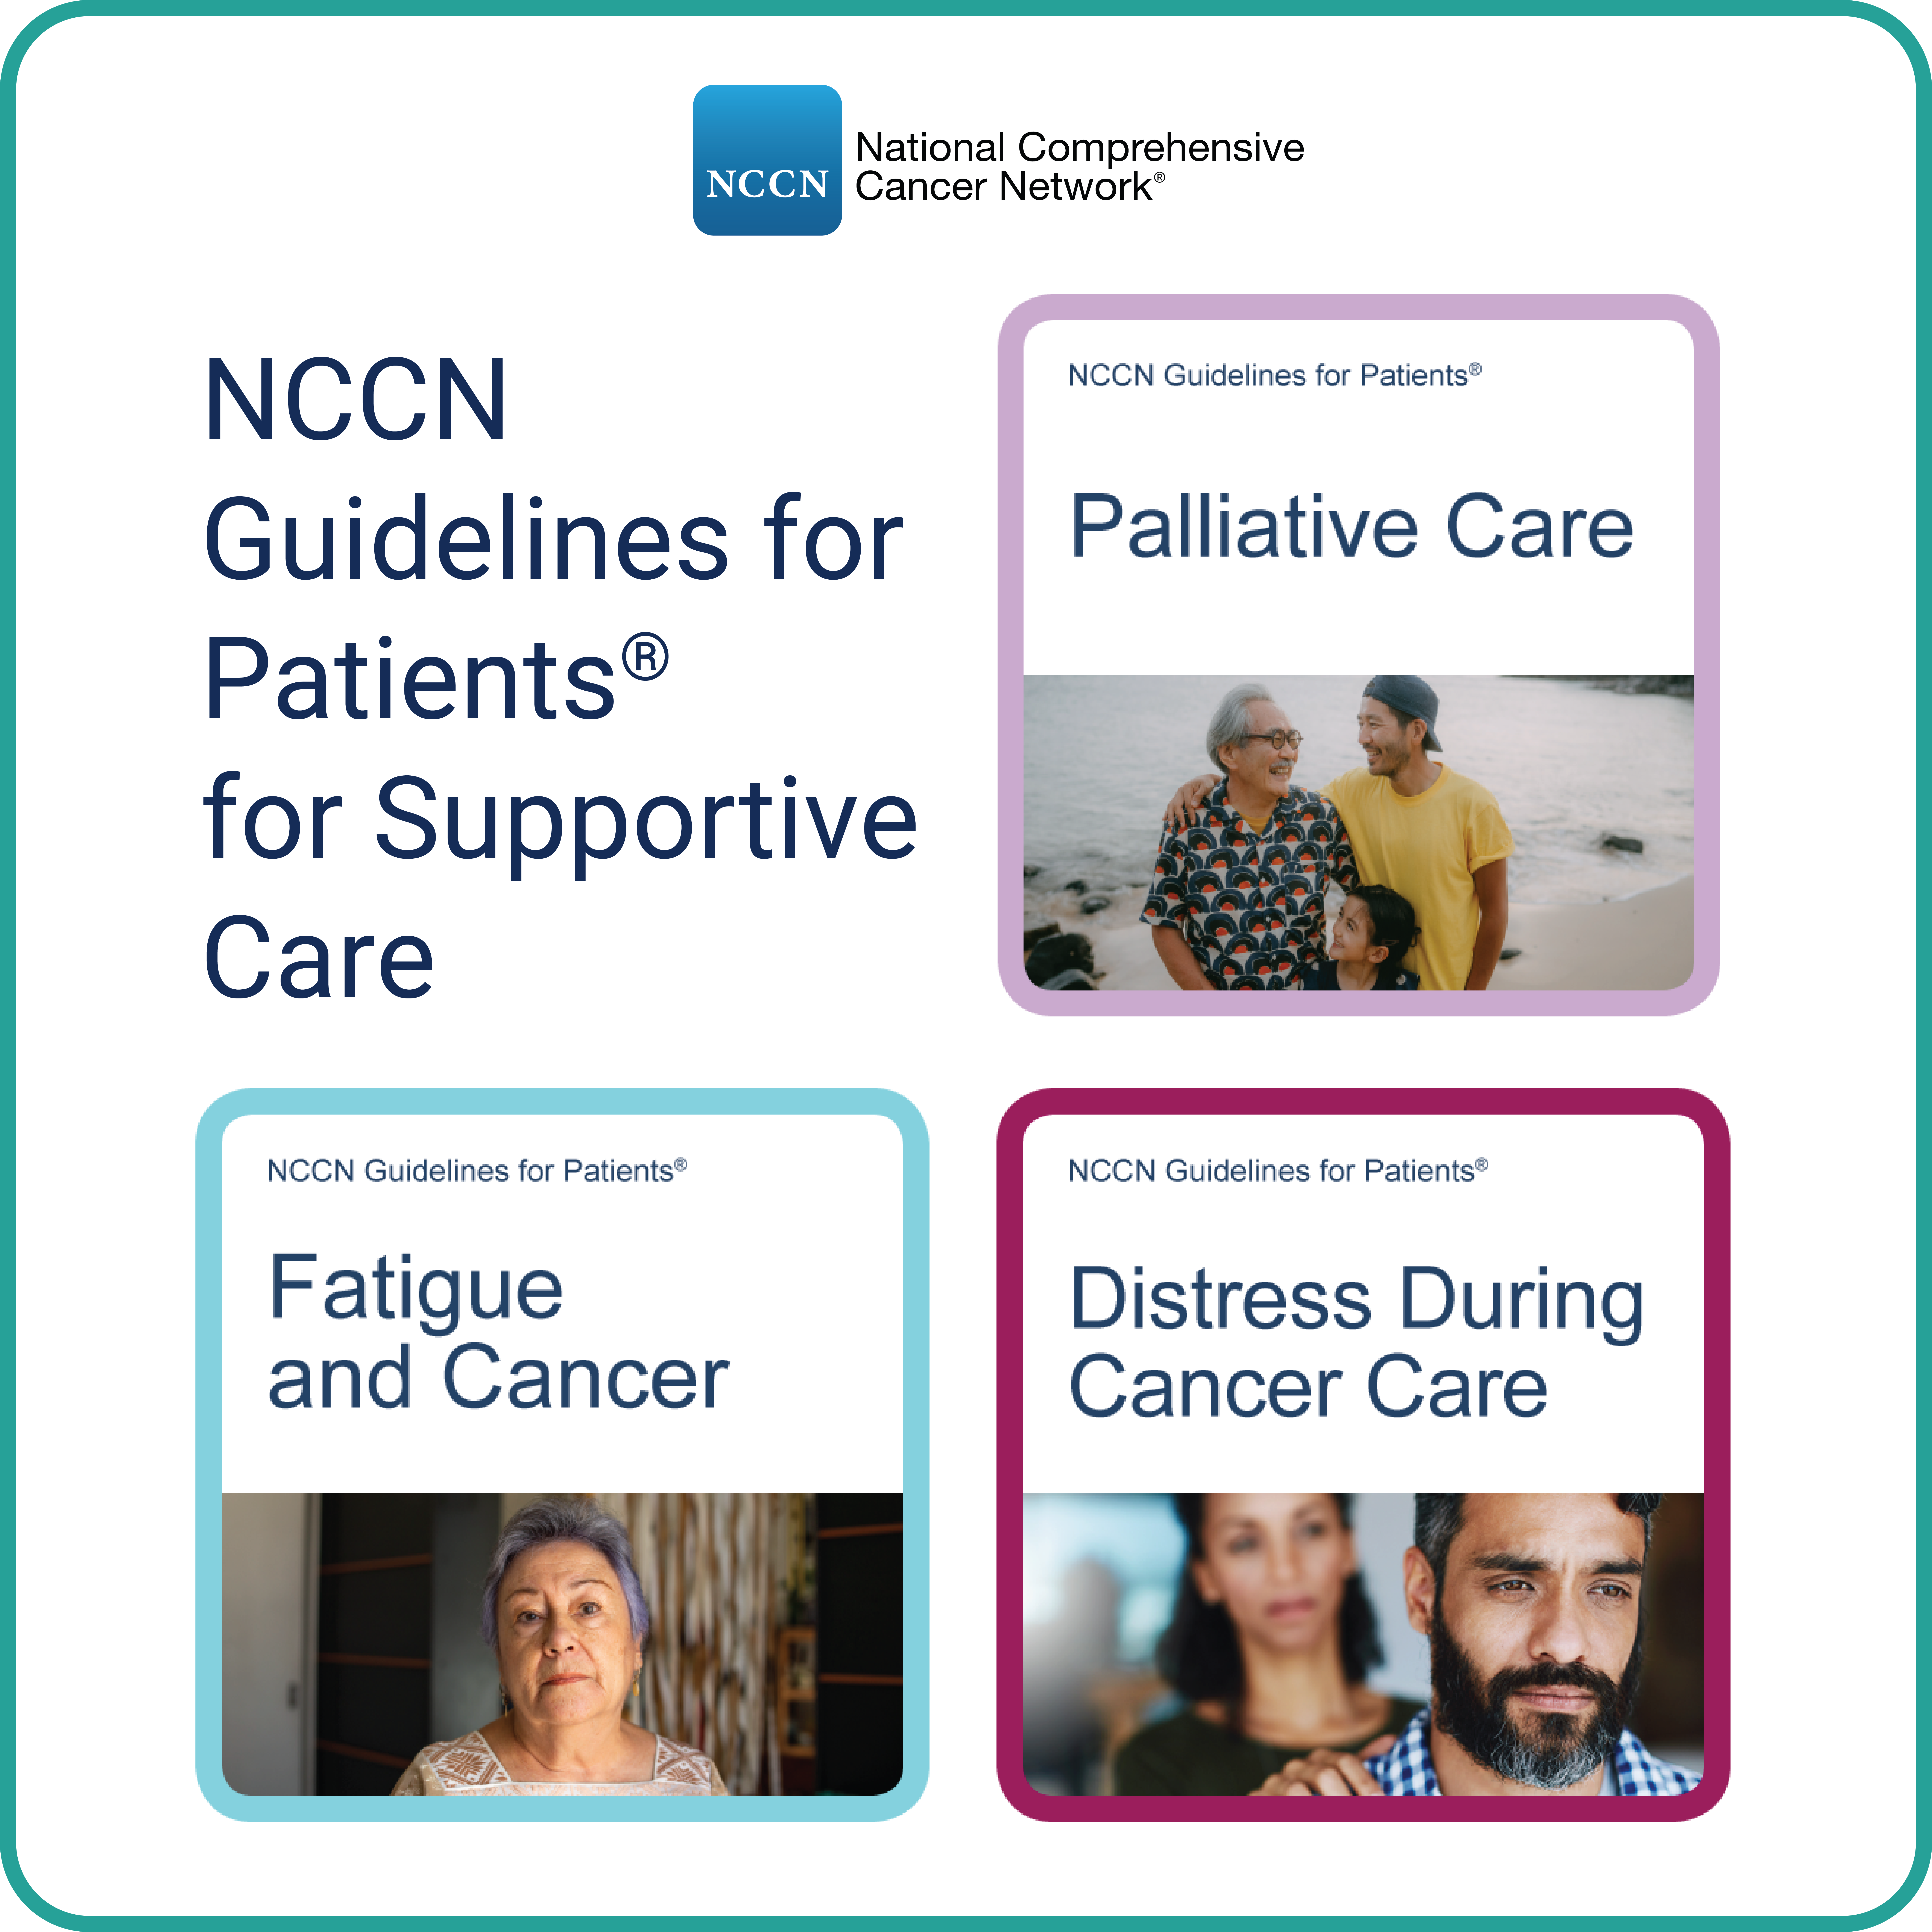 NCCN Guidelines for Patients: Supportive Care